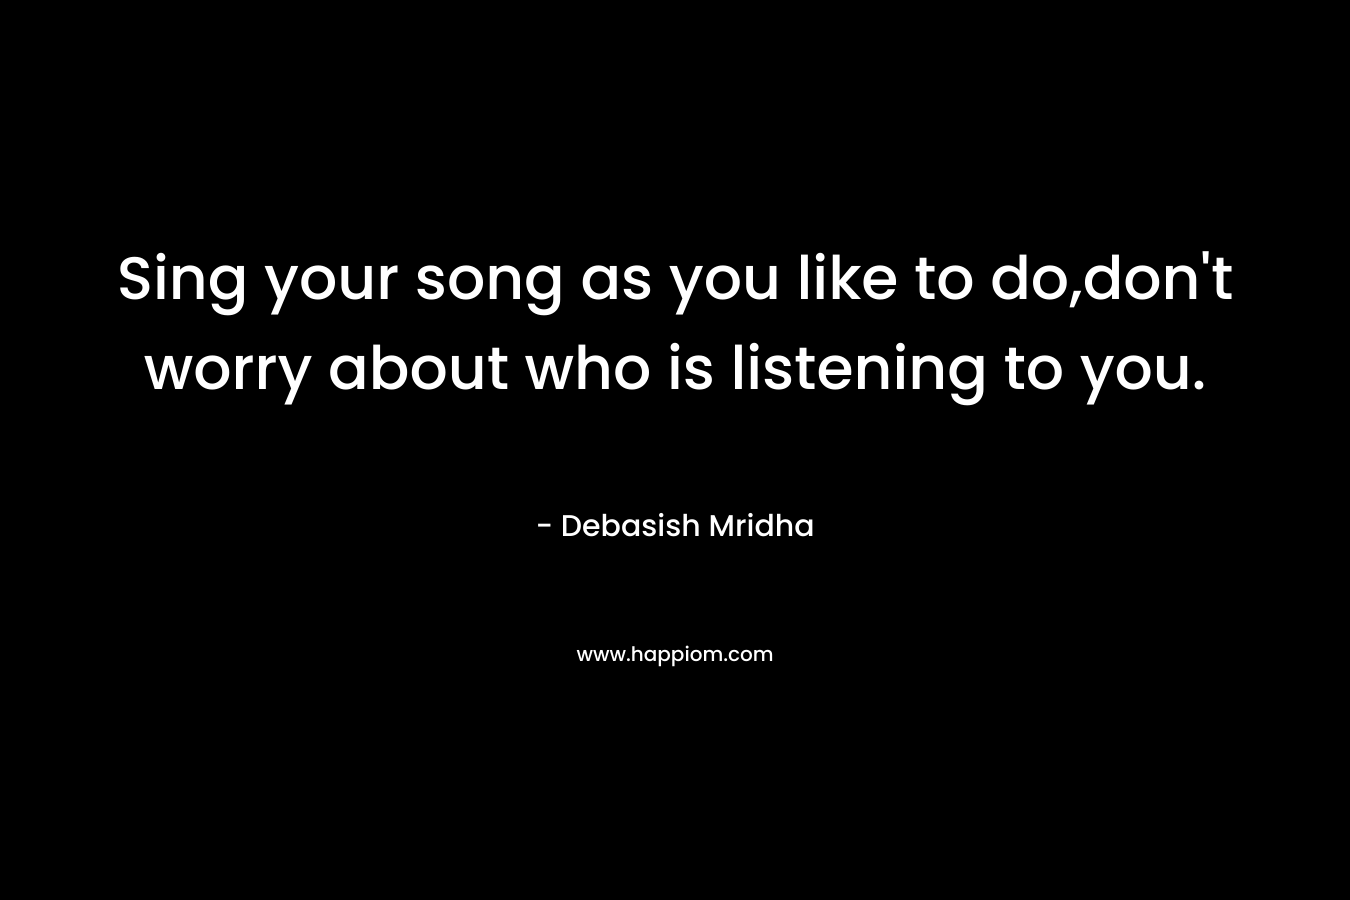 Sing your song as you like to do,don't worry about who is listening to you.